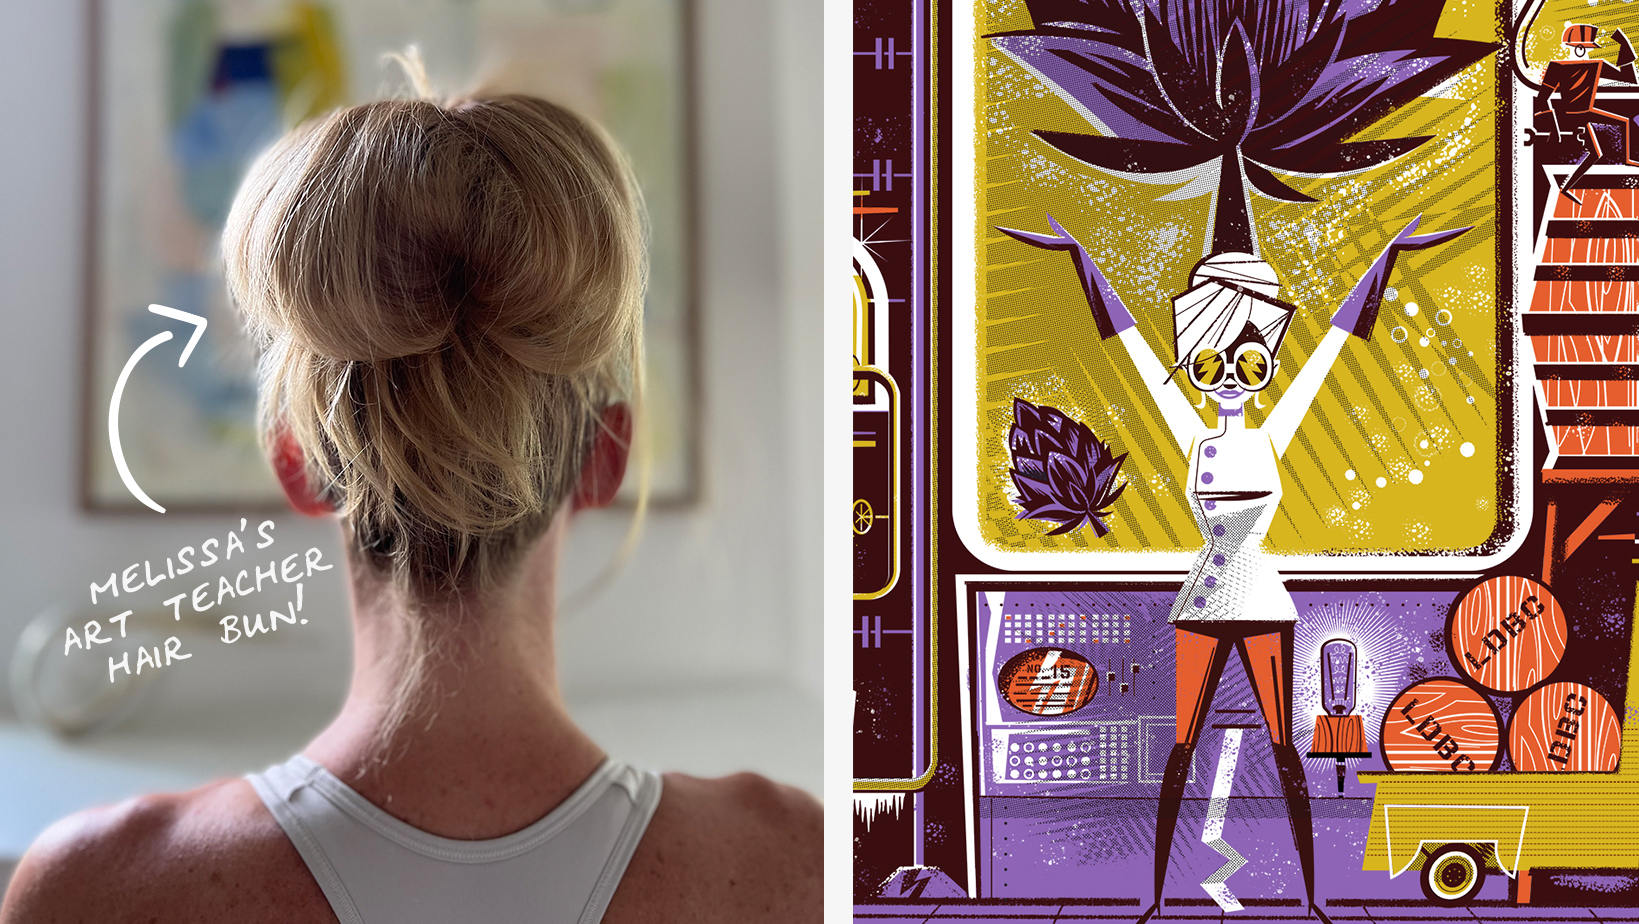 Melissa's Bun and Corresponding Poster where Bun is Featured Alt Tag